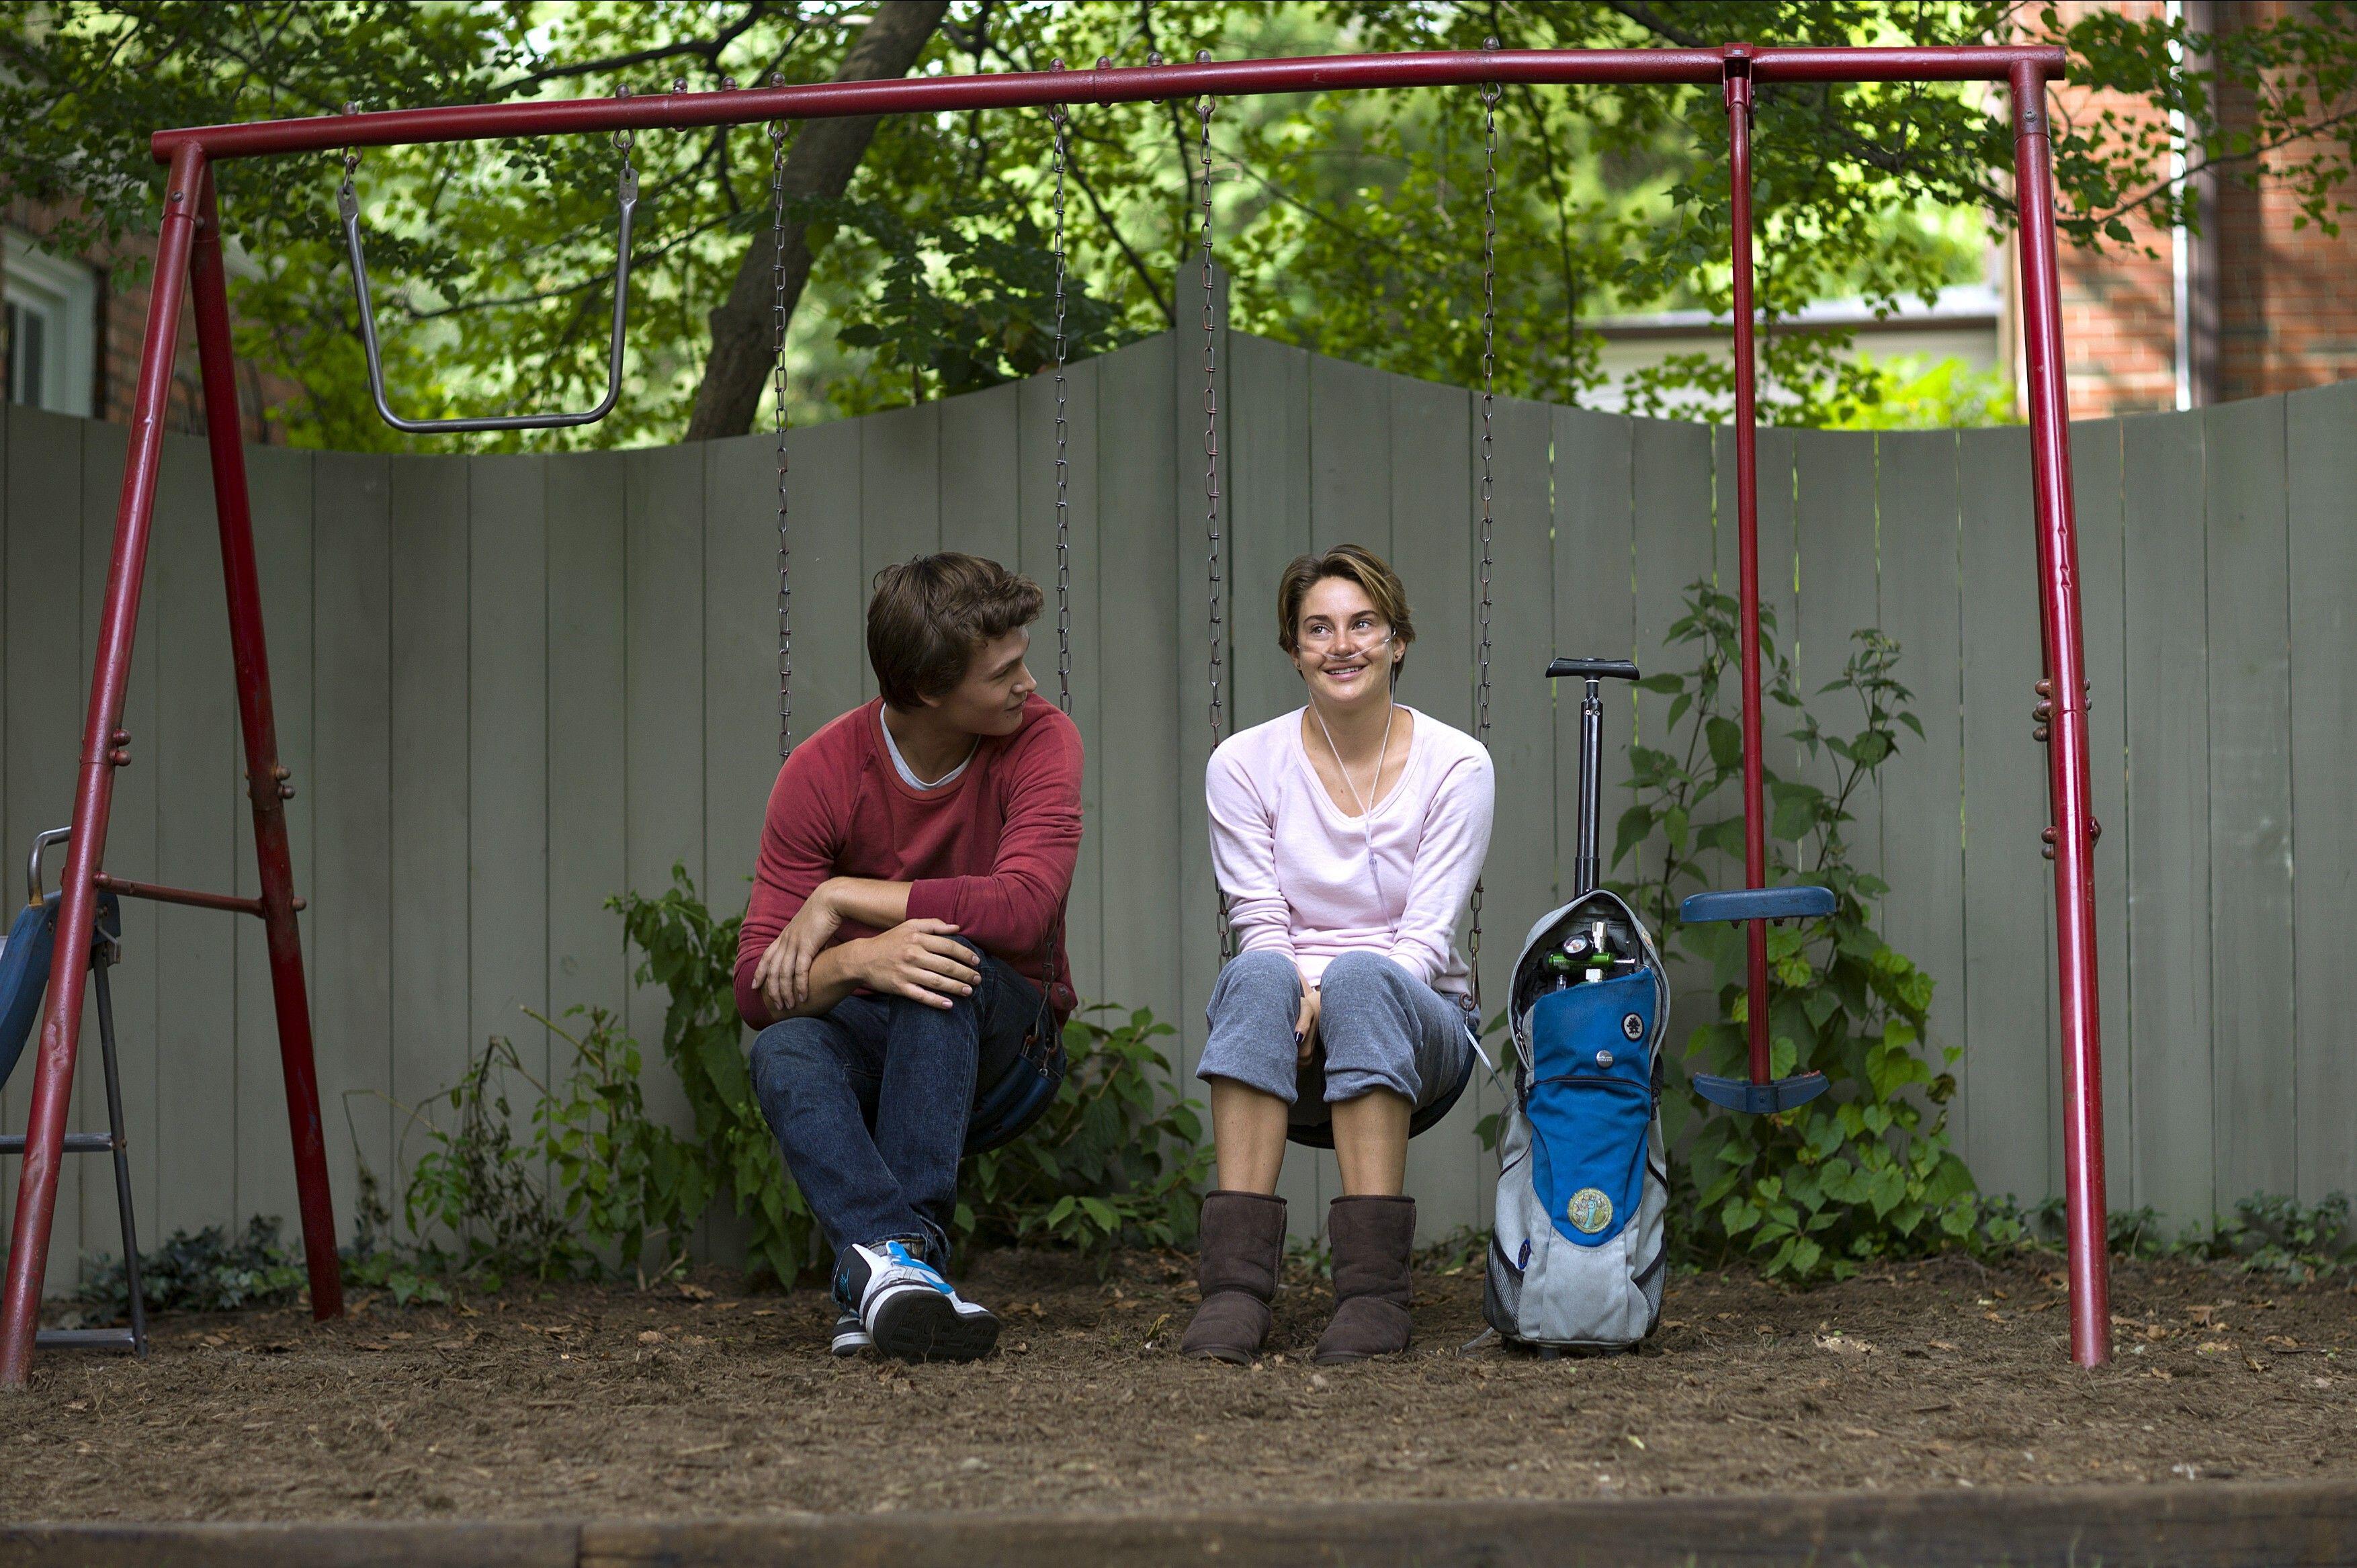 Shailene Woodley stars as Hazel and Ansel Elgort as Augustus in The Fault in Our Stars